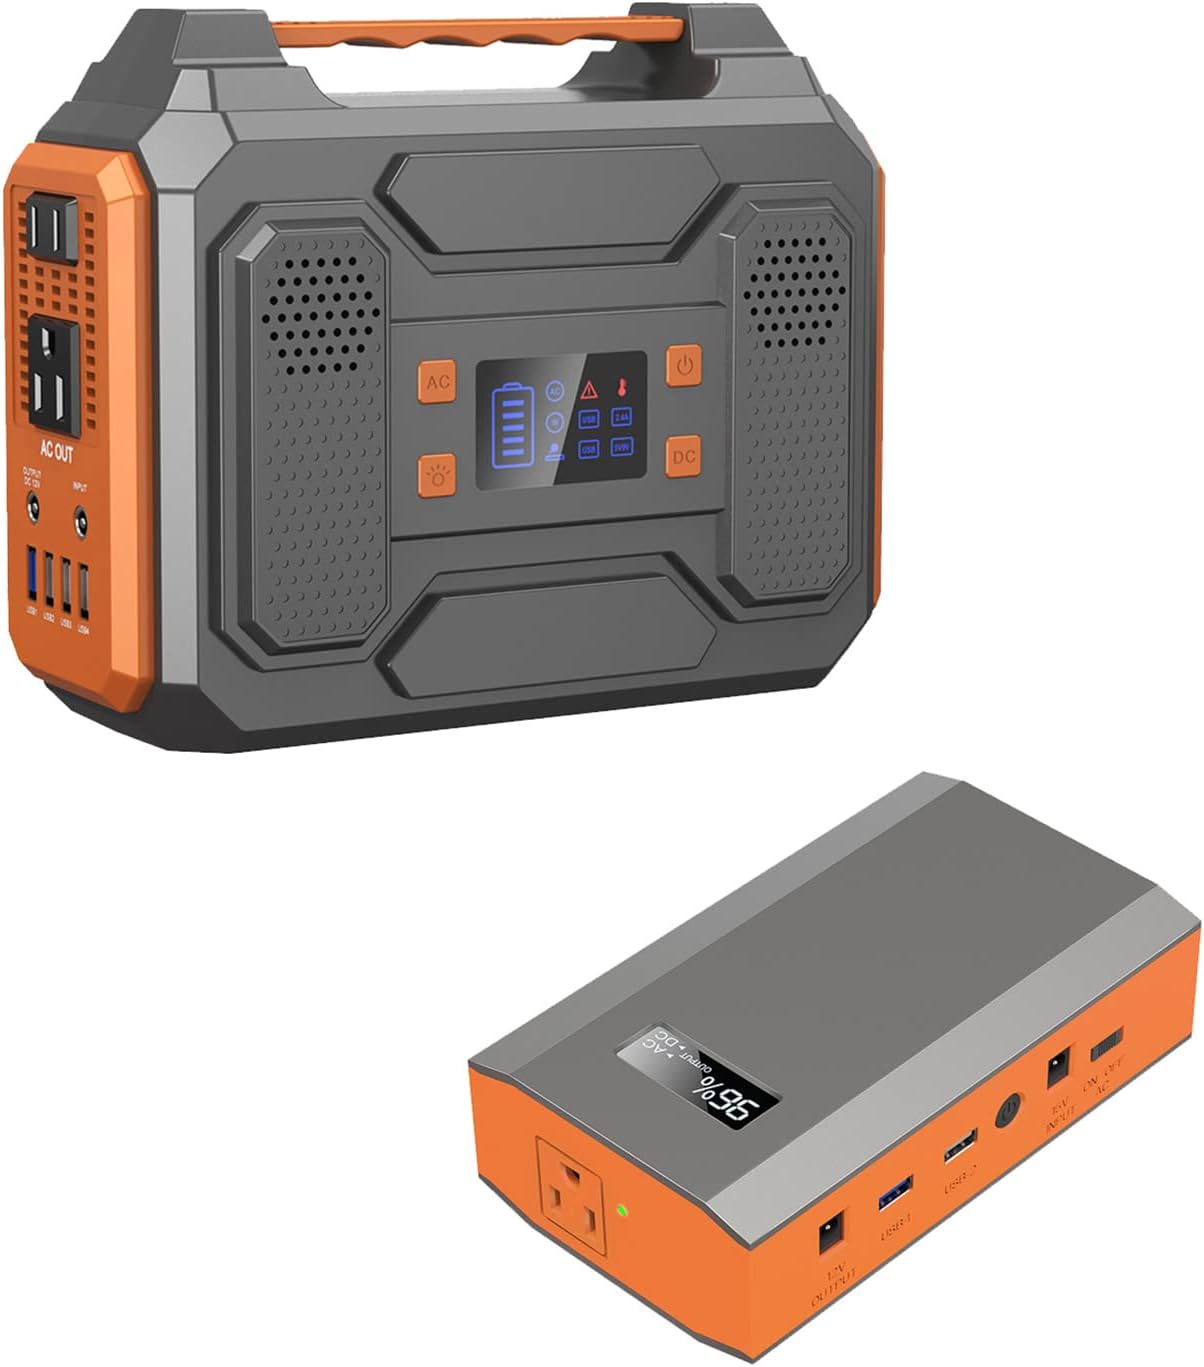 Review of Portable Power Station 300W and Portable AC Power Bank 65W, ZeroKor Portable Power Station Bundle